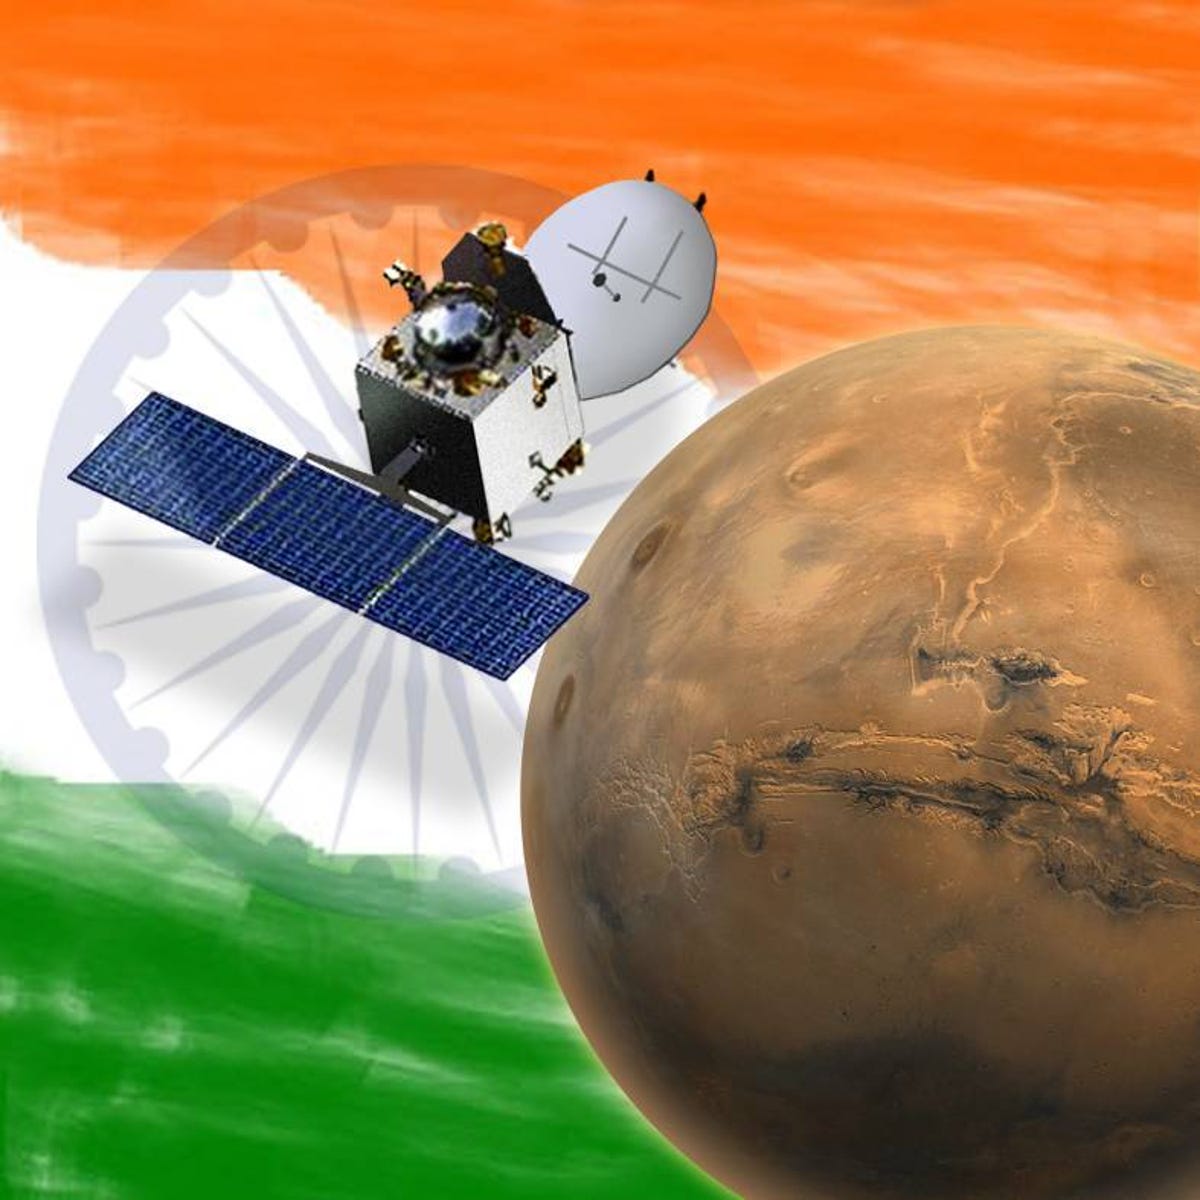 An Indian flag is seen in the background, with Mangalyaan visible on it.